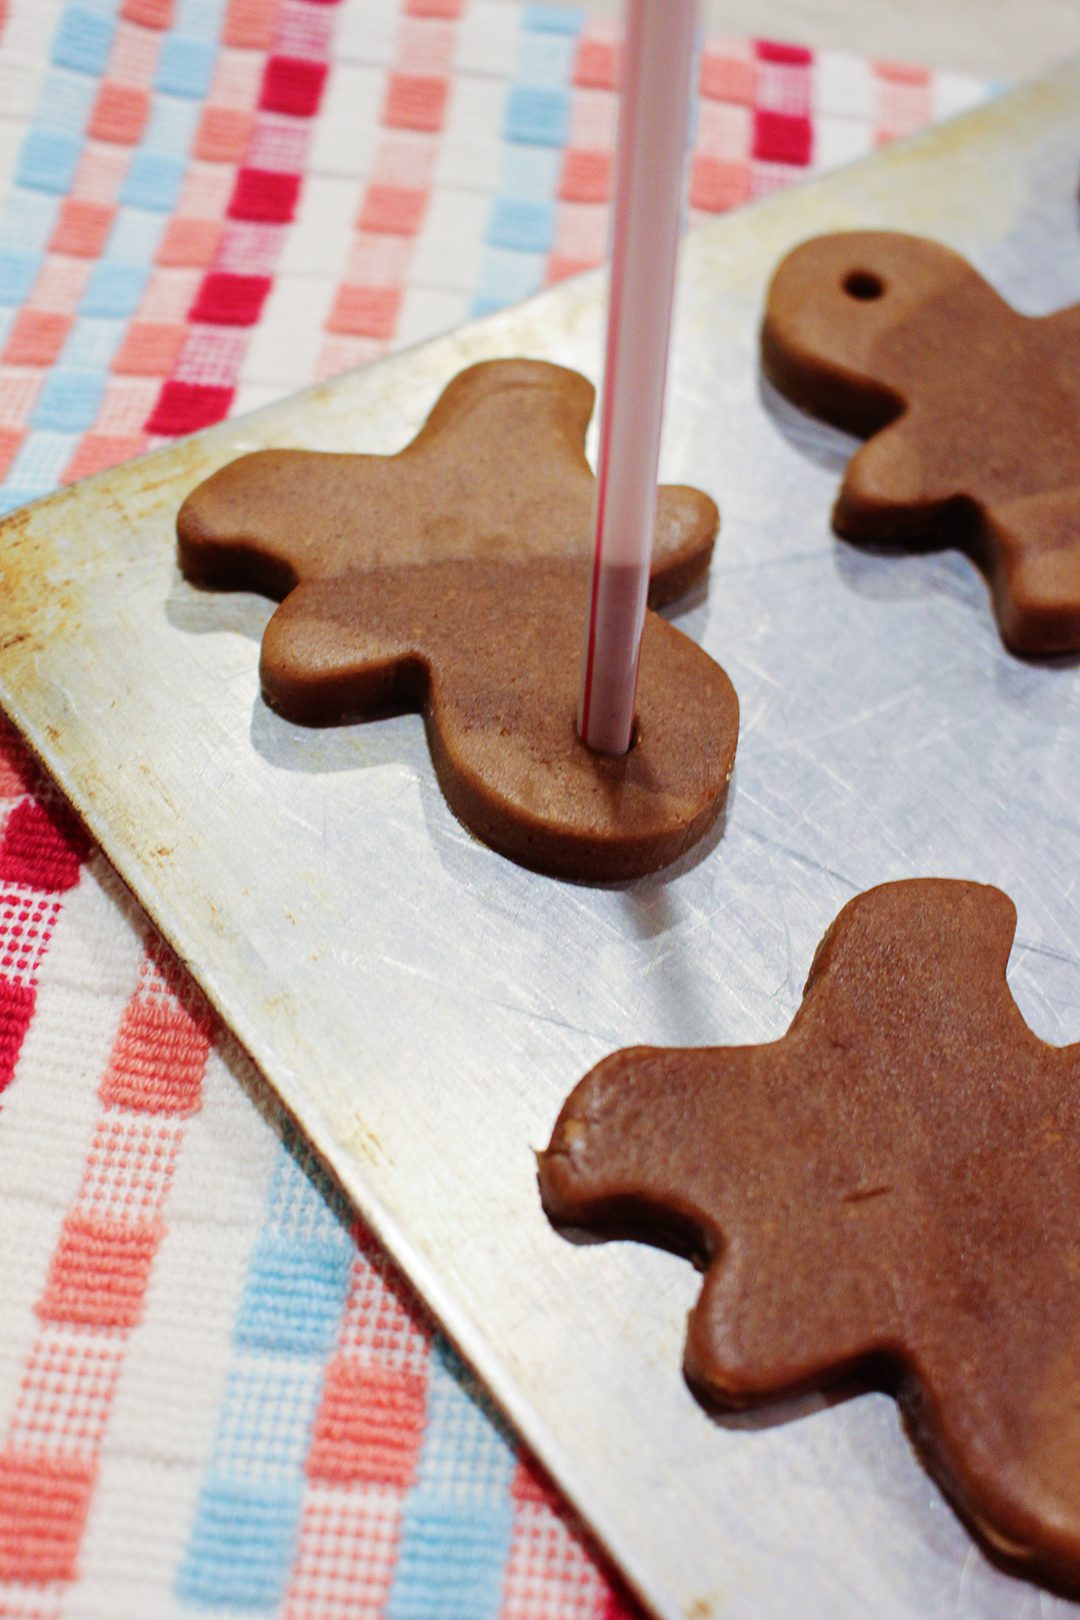 A straw poking a hole in the top of a gingerbread cookie sitting on a baking sheet.